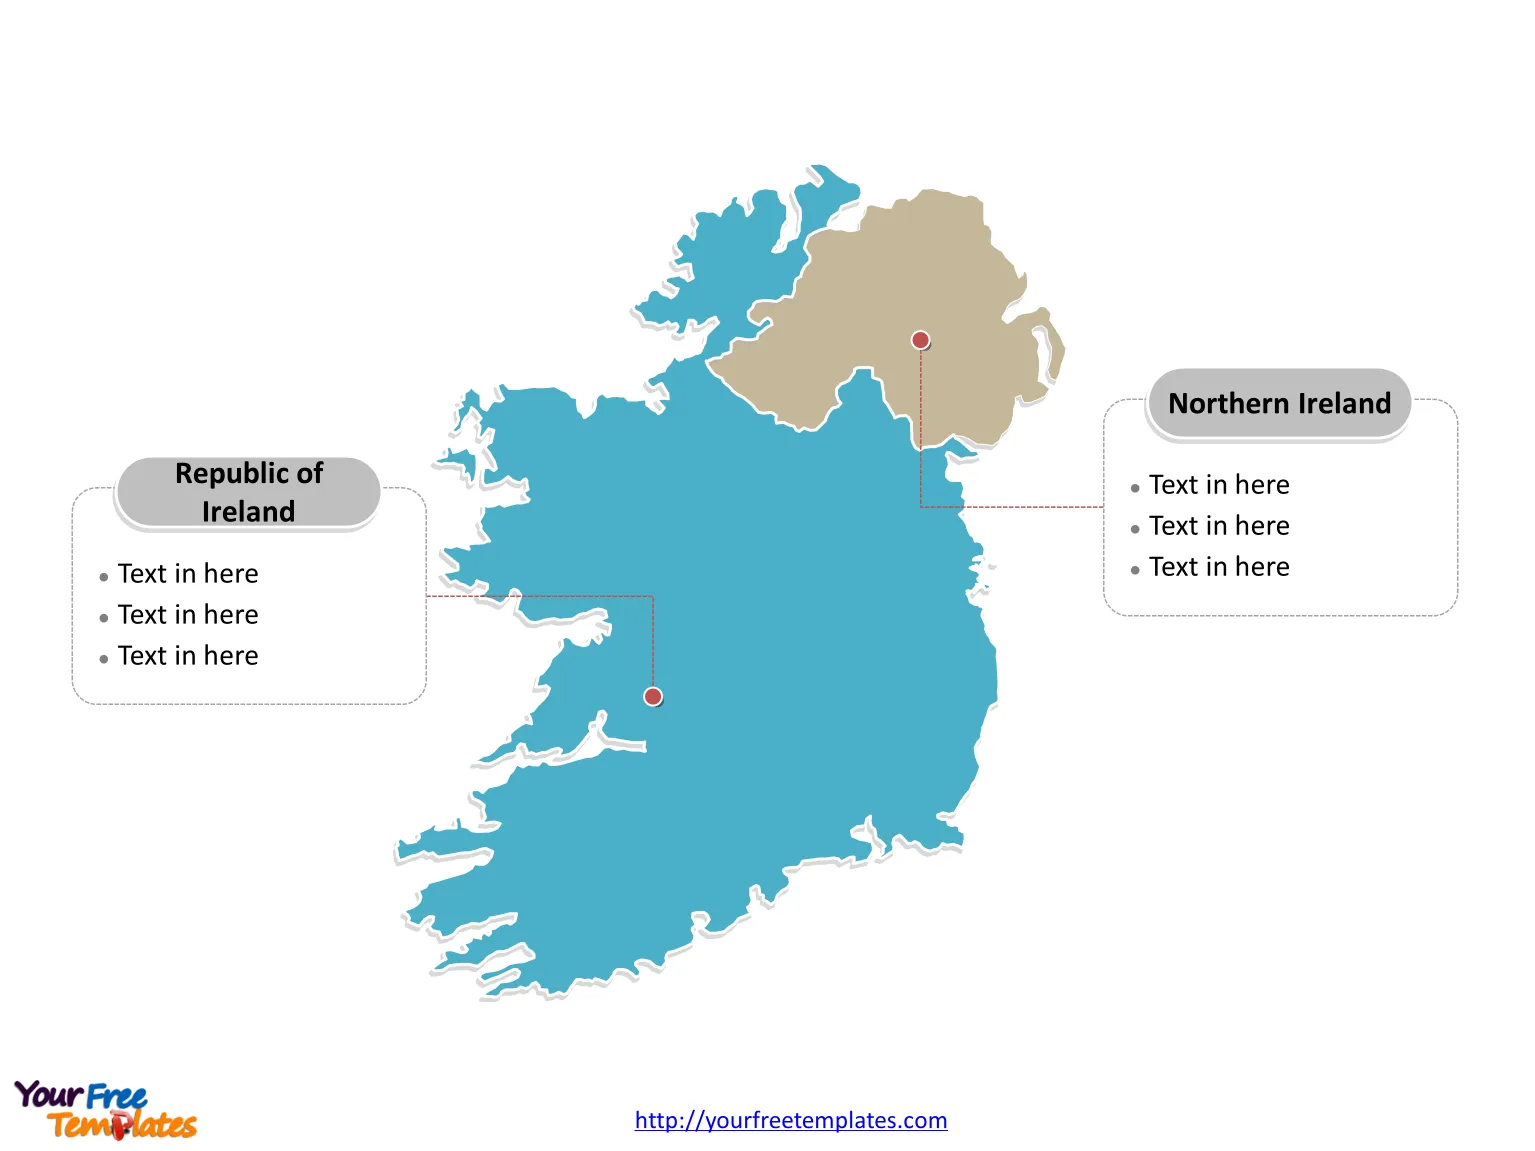 Ireland Political map labeled with Republic of Ireland and Northern Ireland.